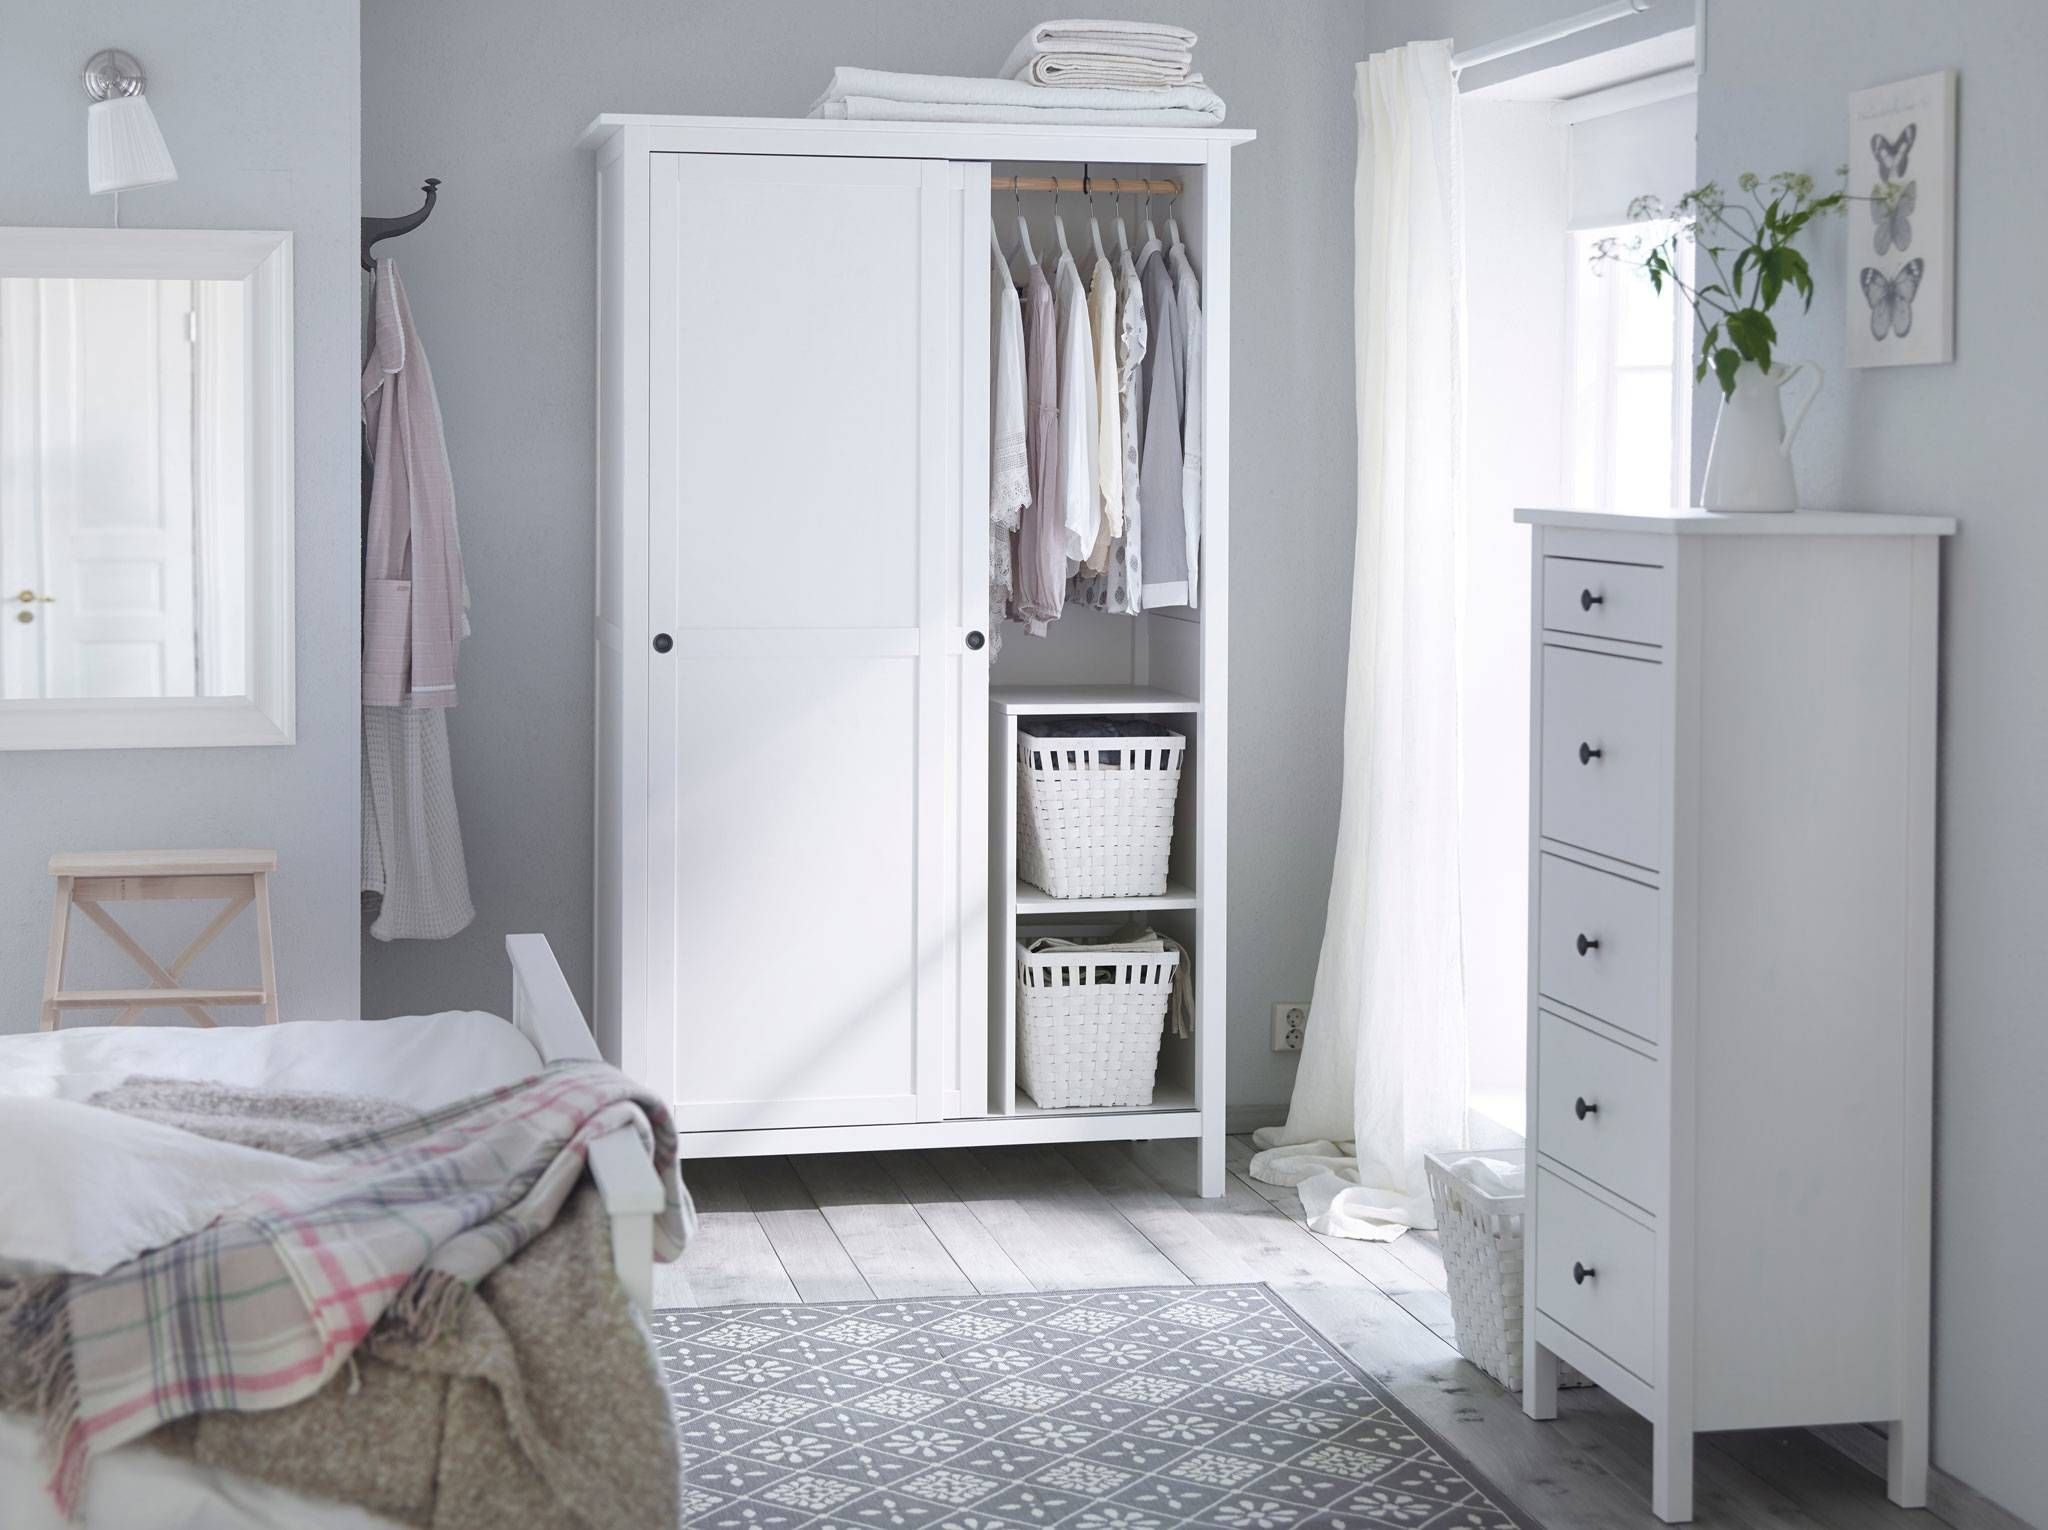 Bedroom Furniture & Ideas | Ikea Intended For White Bedroom Wardrobes (View 2 of 15)